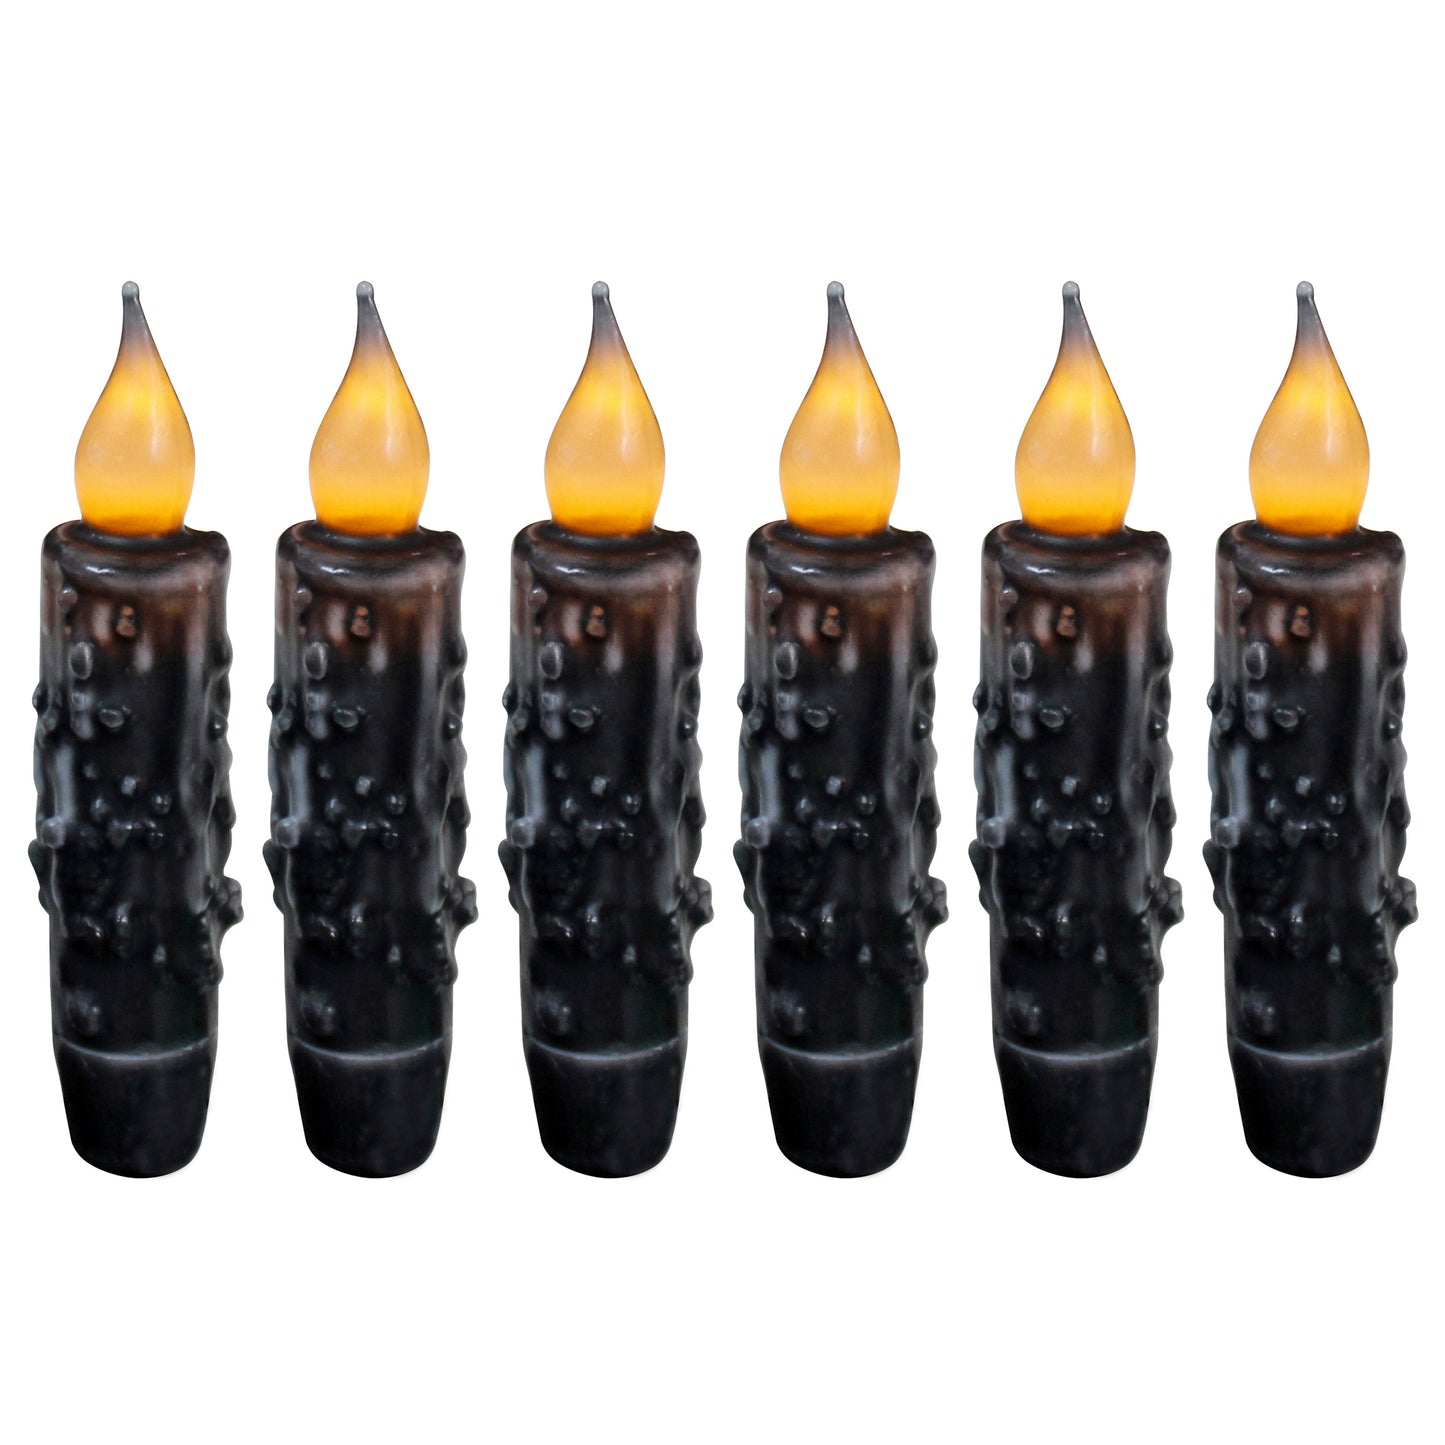 CVHOMEDECO. Real Wax Hand Dipped Battery Operated LED Timer Taper Candles Rustic Primitive Flameless Lights Décor, 4.75 Inch, Matt Black, 6 PCS in a Package